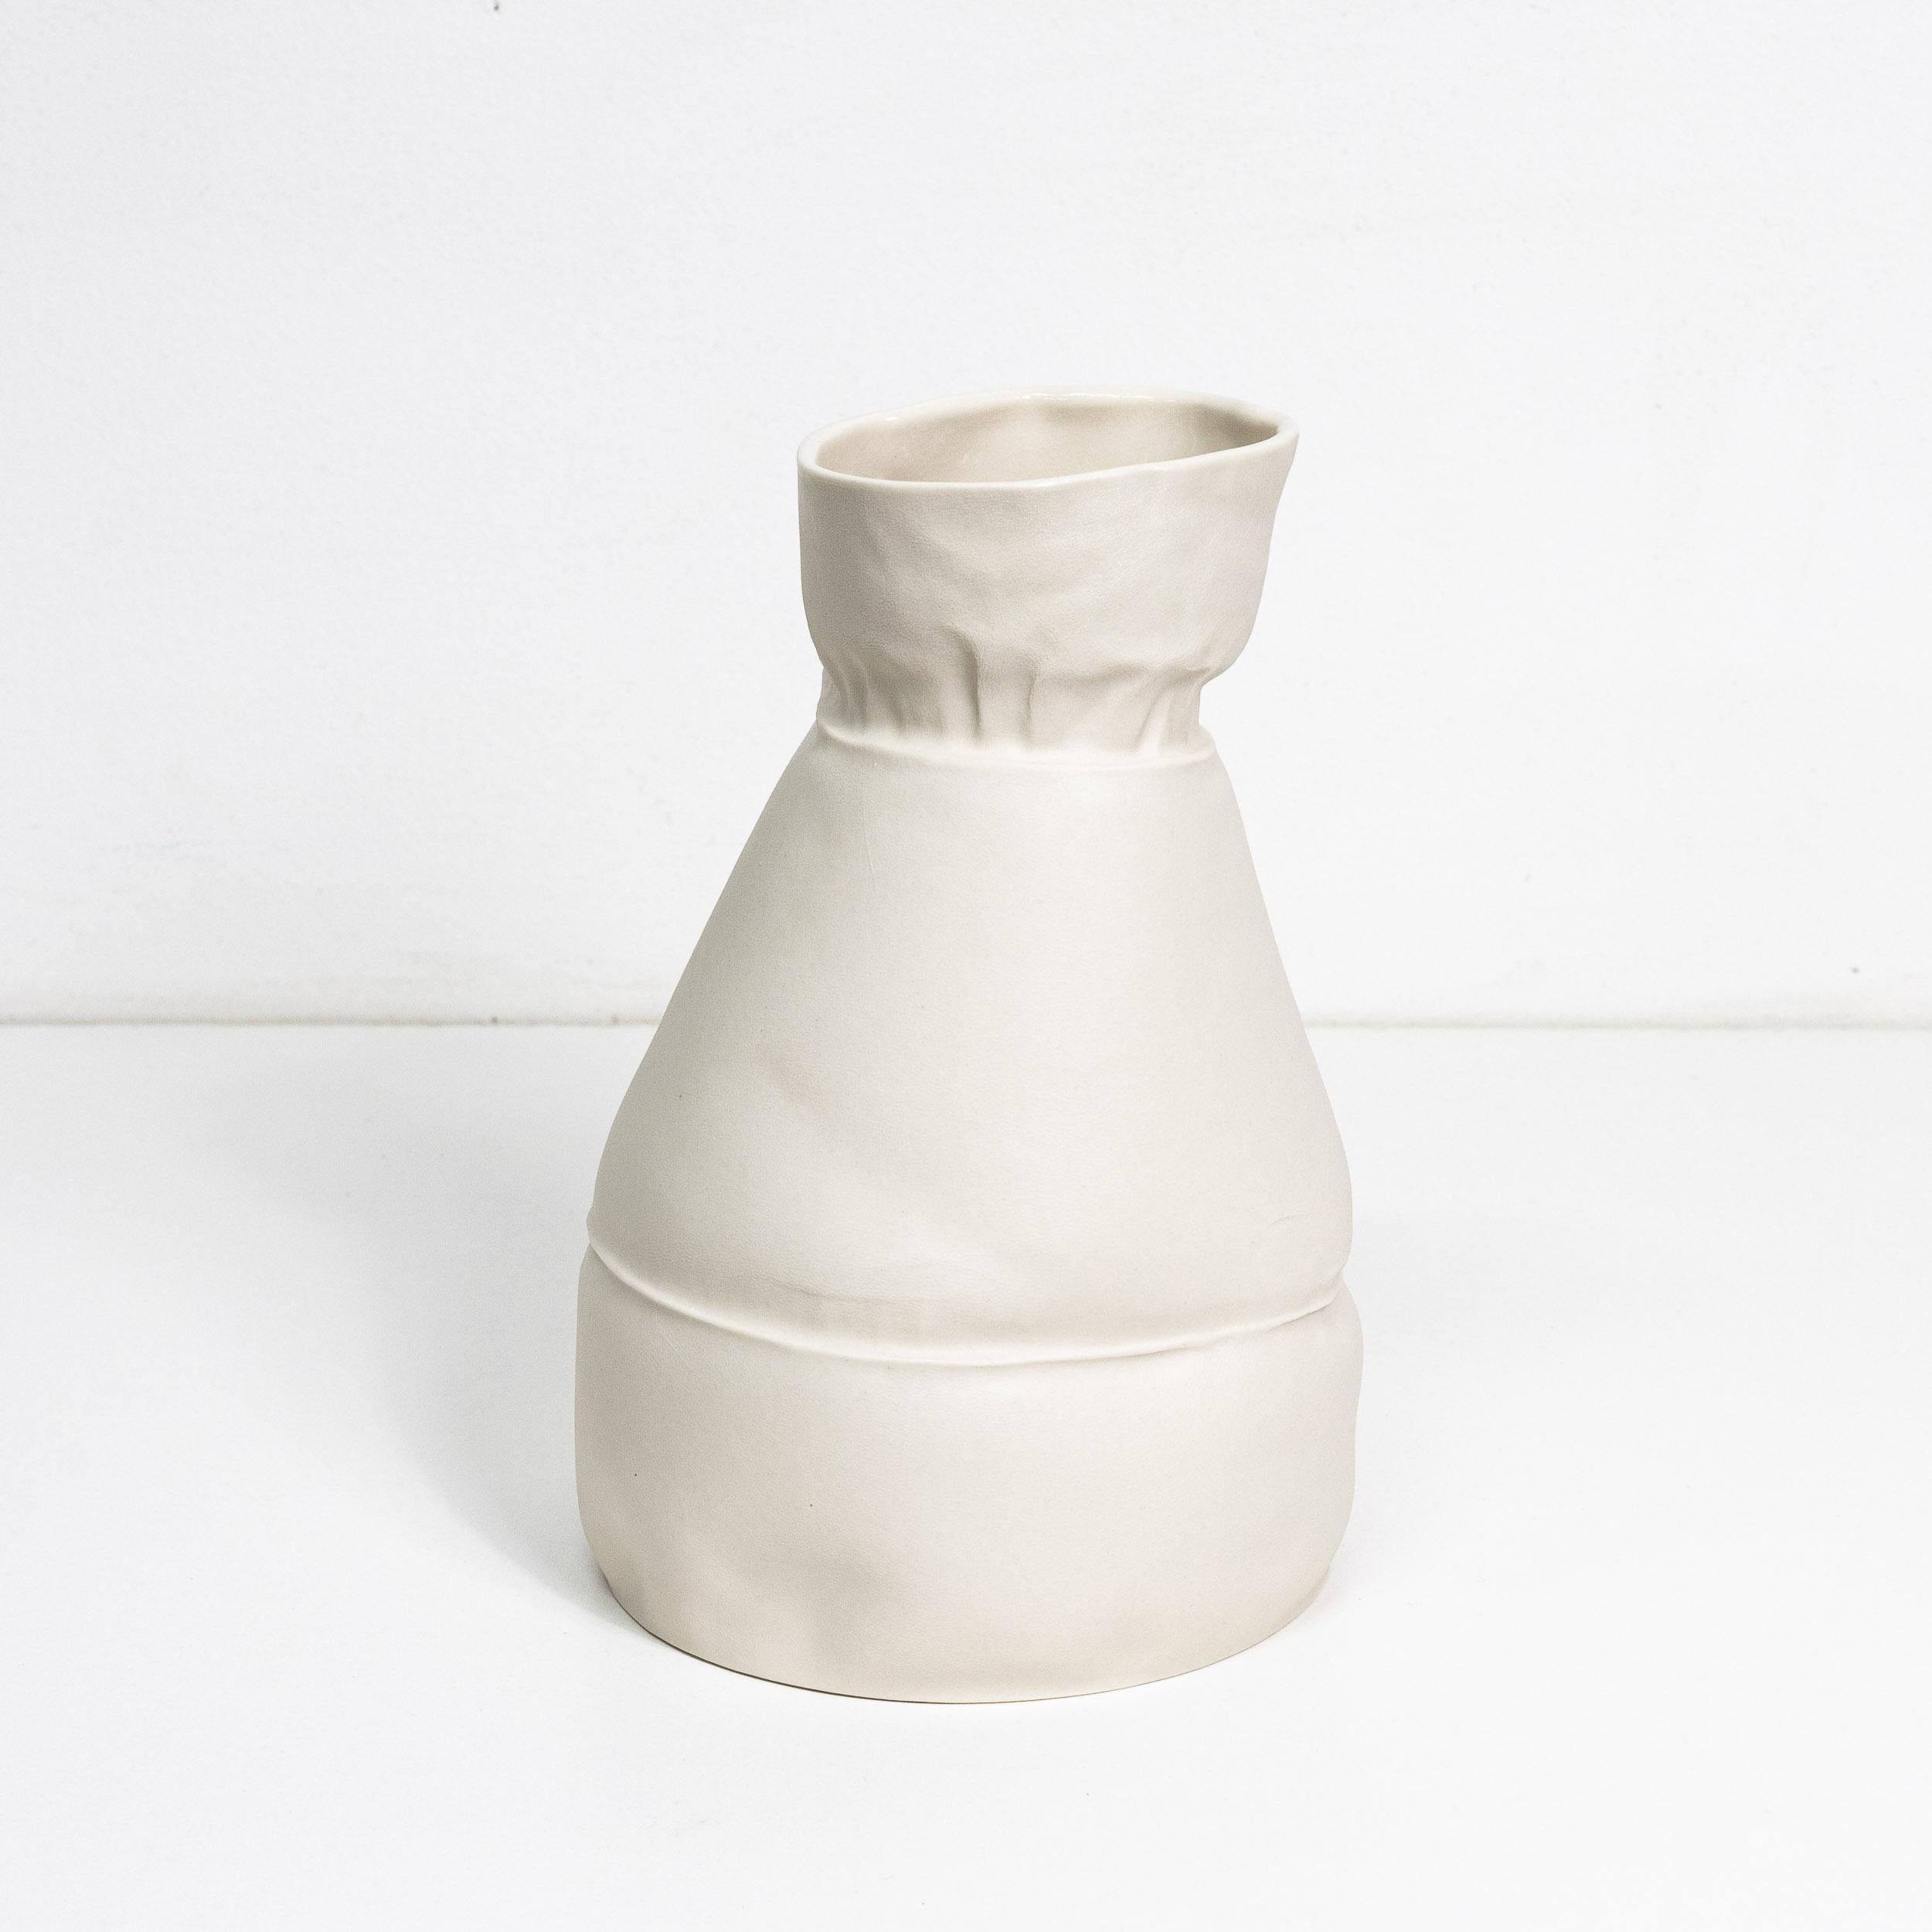 A porcelain flower vase with an organic form and texture, made by casting liquid porcelain in sewn leather molds. Clear glaze applied on interior surface. As a result of the production process each vase is one-of-a-kind. 

The vessel is watertight